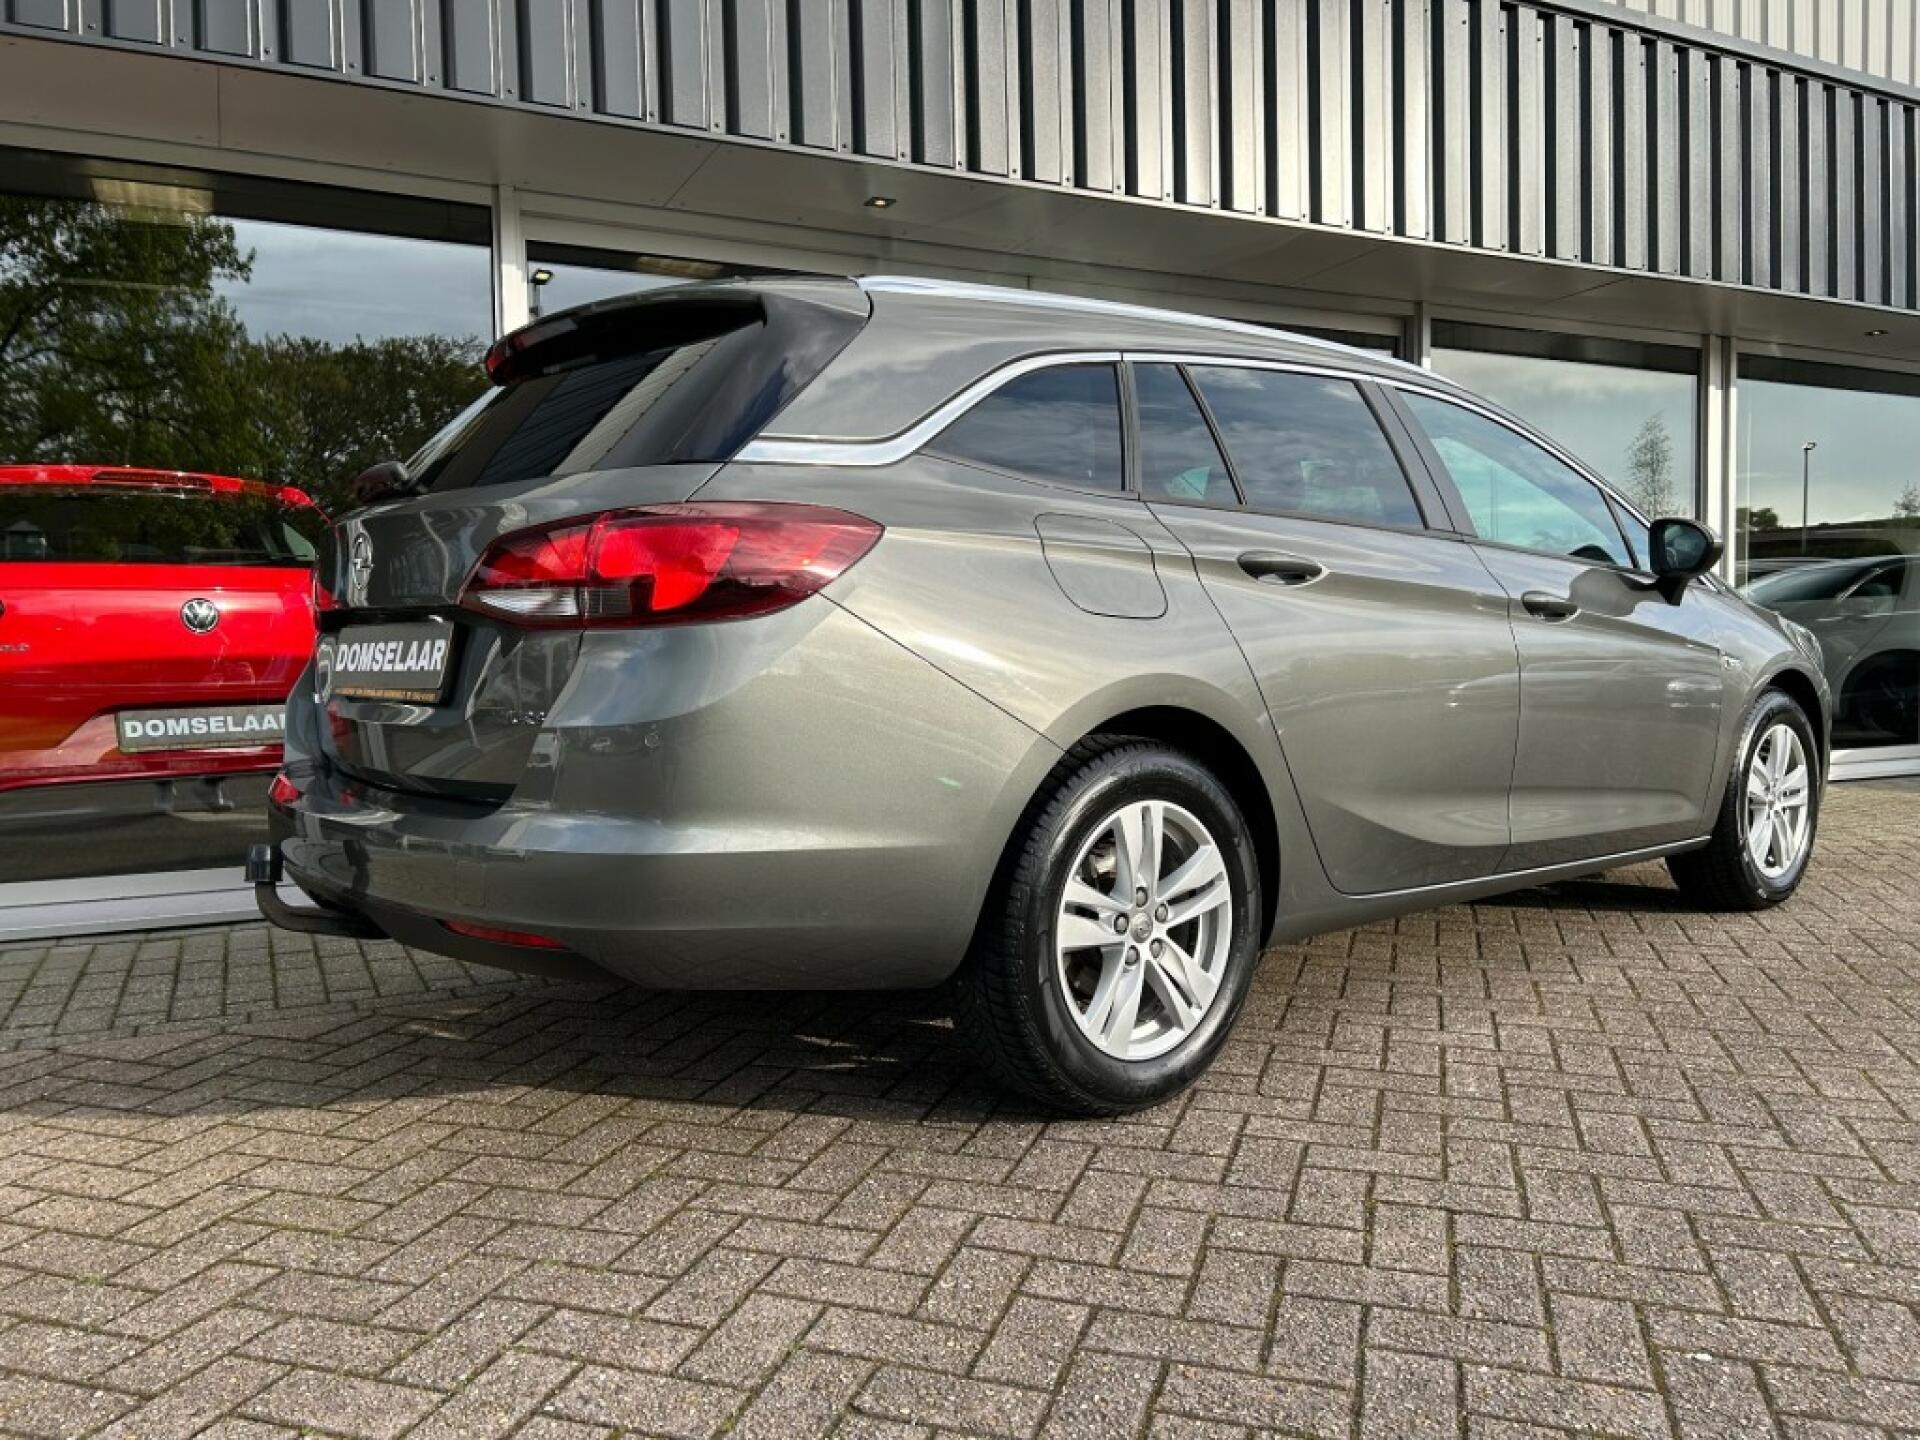 OPEL ASTRA Stationwagon 5 drs